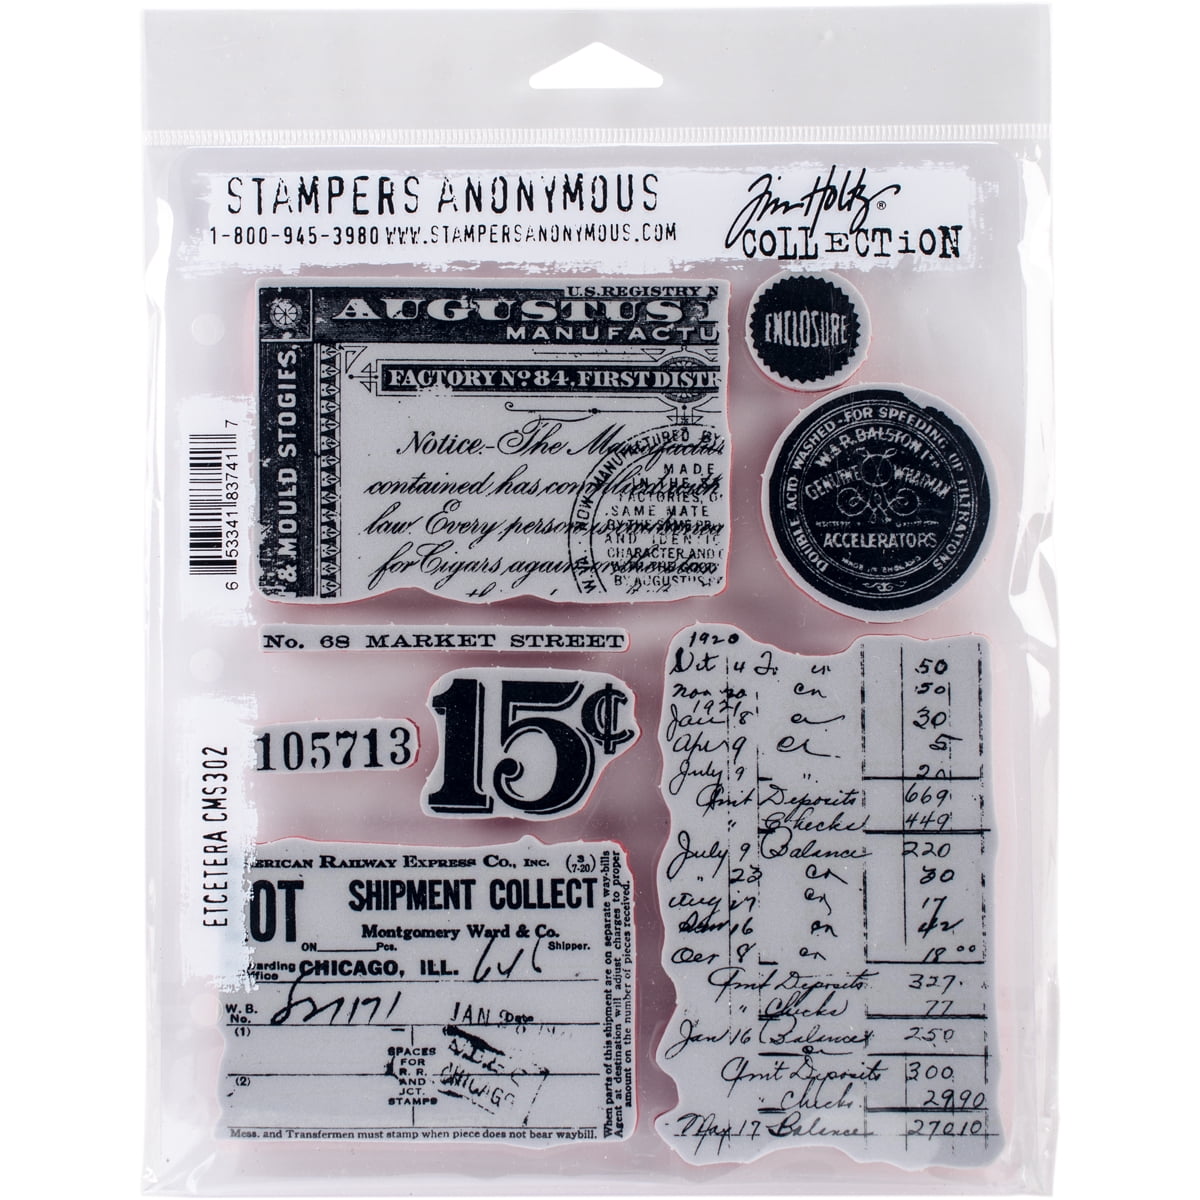 Stampers Anonymous Tim Holtz Cling Rubber Stamp Set Ledger Script 7 by 8.5